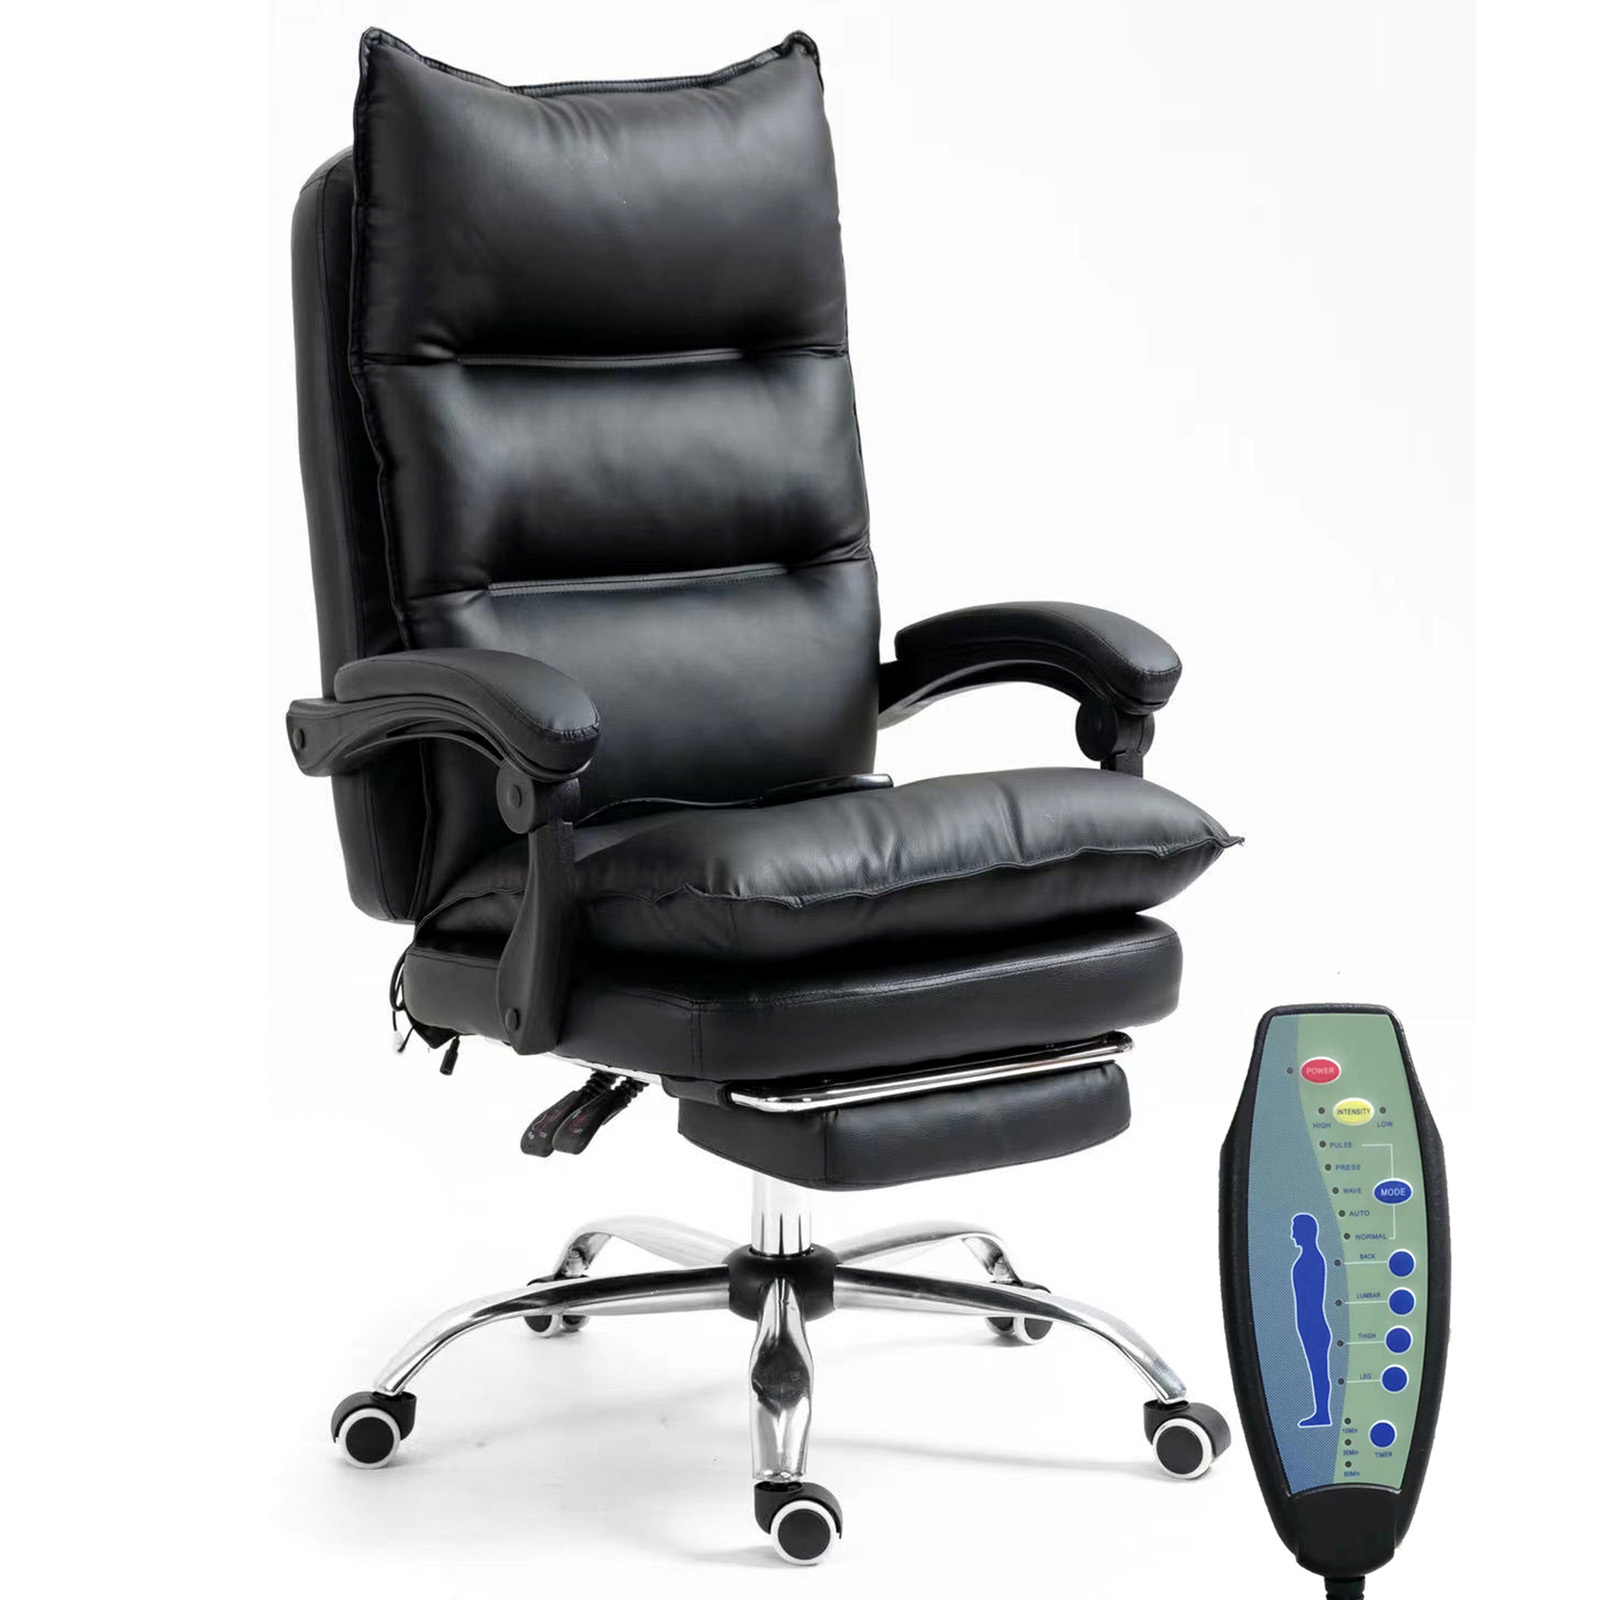 Plush Deluxe Executive Reclining Office Chair With Foot Rest And Massager